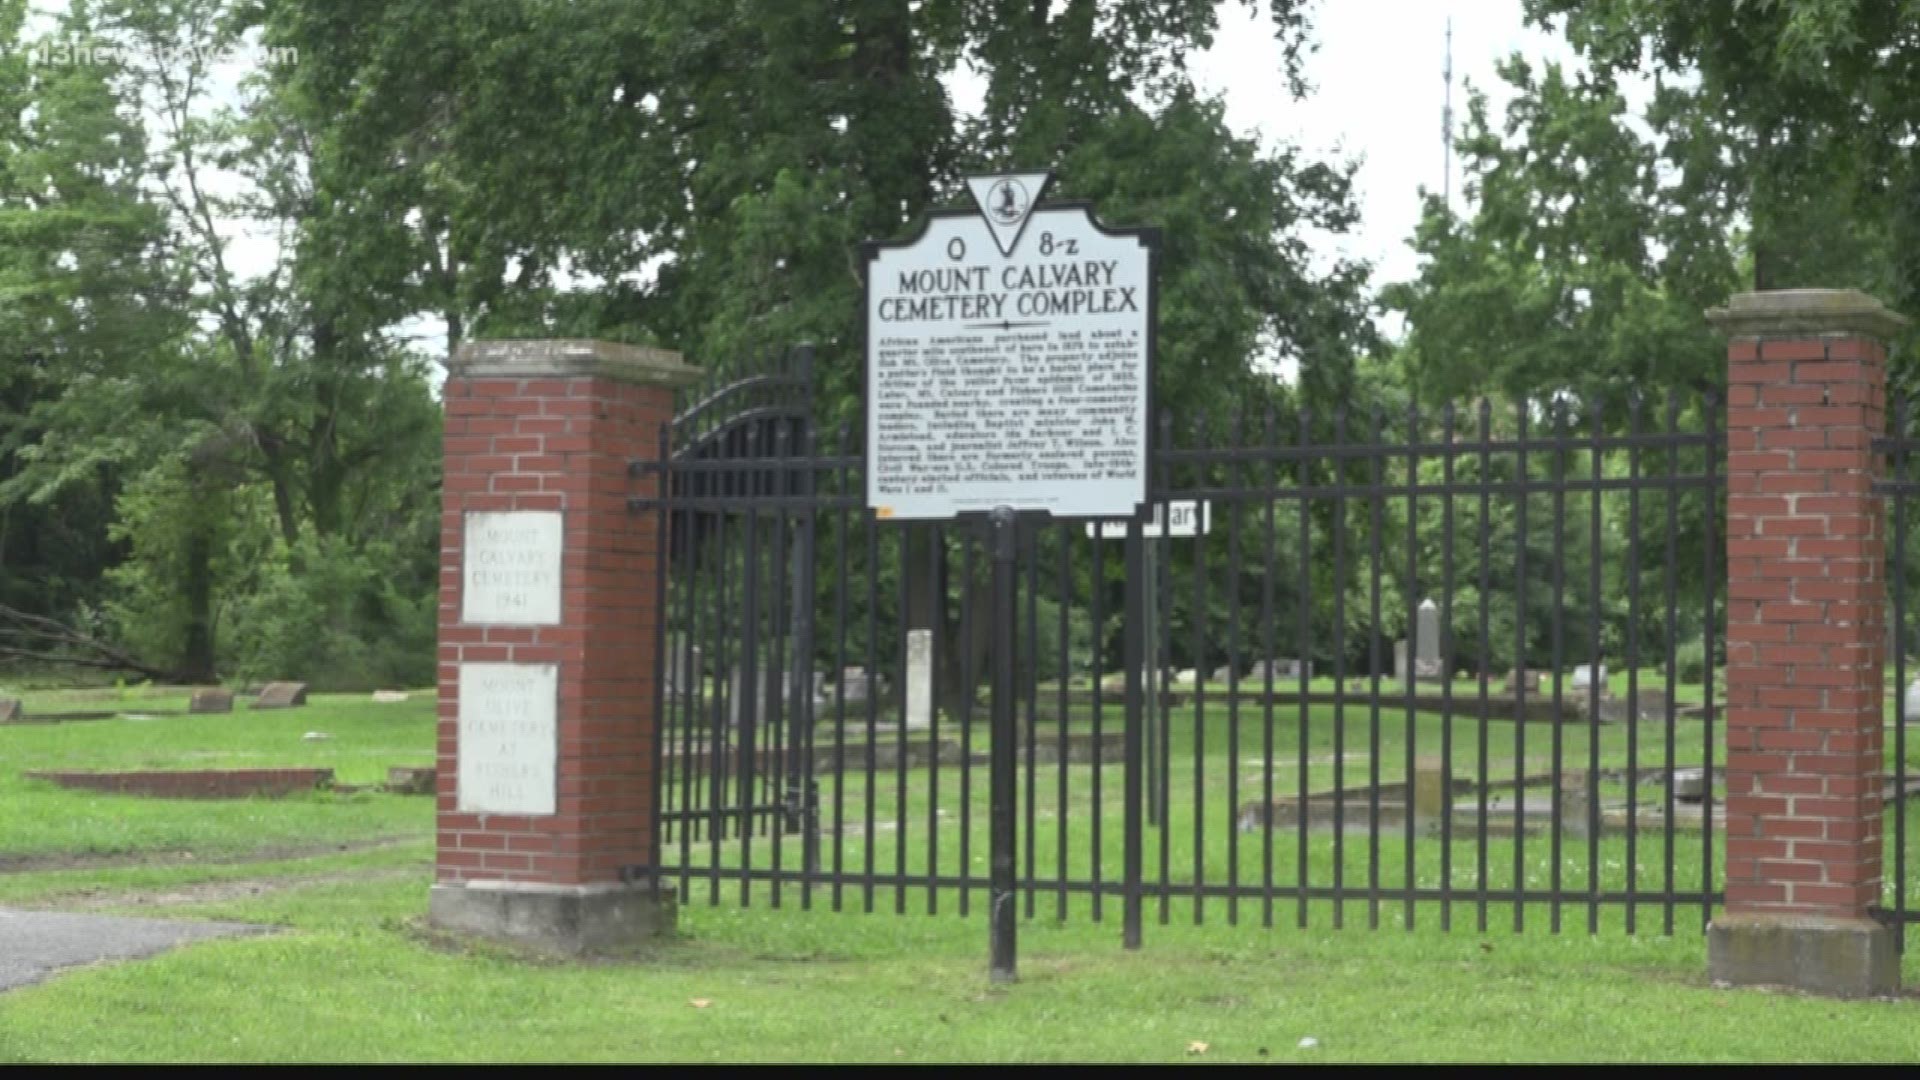 The city of Portsmouth gets some much-needed money to restore historical cemeteries.